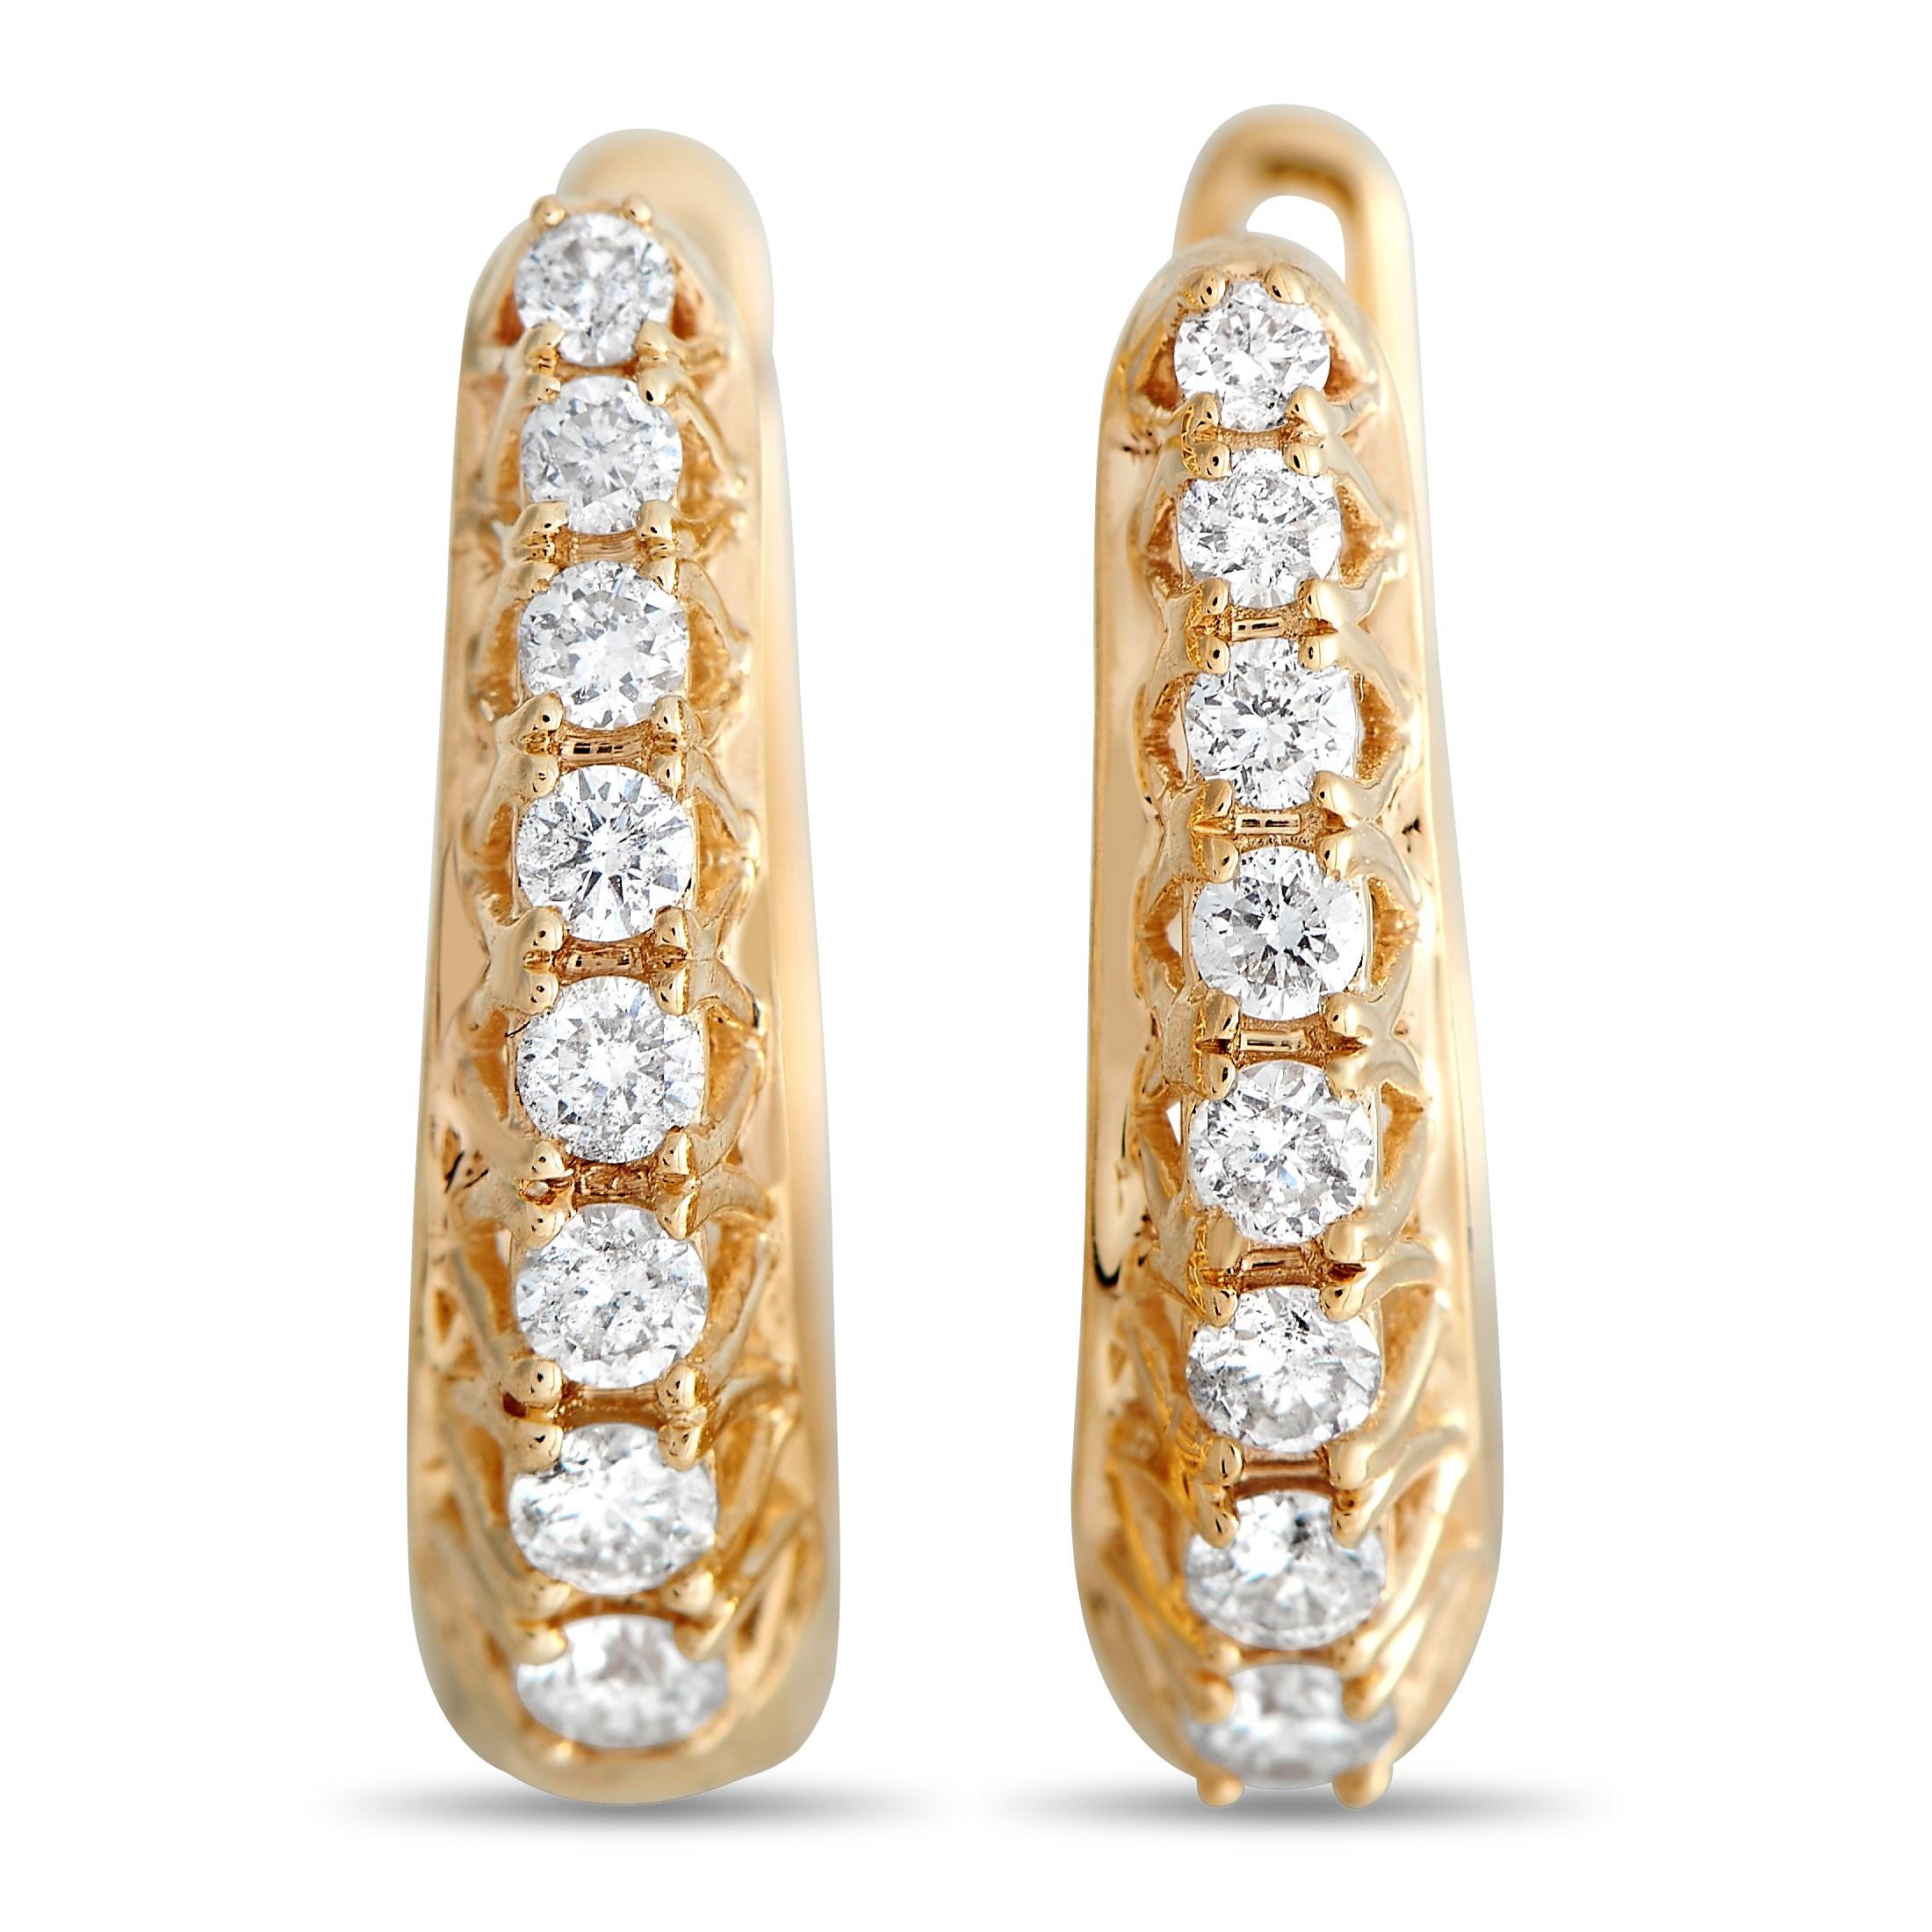 Easy to put on and easy to style with, these yellow-gold huggies cradle your earlobe with elegance. Round diamonds in raised prongs line each snug-fitting hoop. A lever back closure secures the earrings in place. Each earring measures 0.25